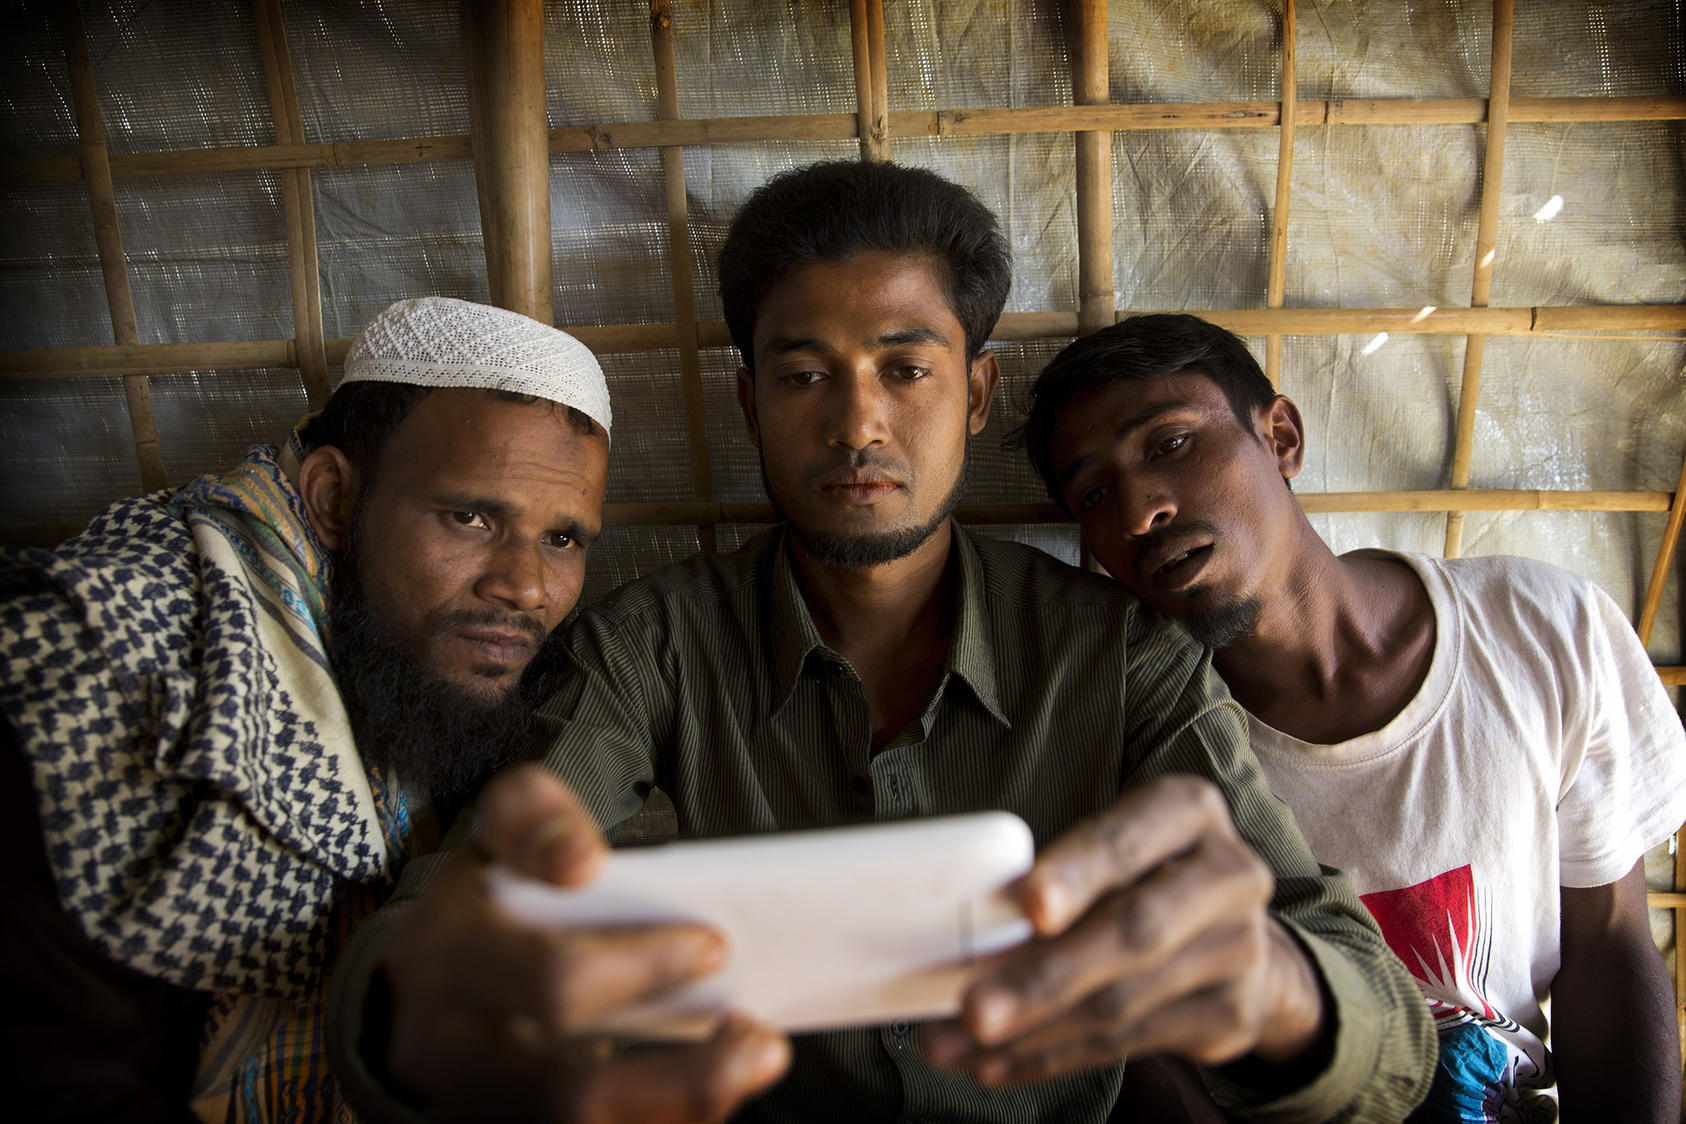 Rohingya Muslim refugees look at a phone in Bangladesh in January 2018. Unrestricted hate speech on Facebook fueled ethnic cleansing in Myanmar. (Manish Swarup/AP)